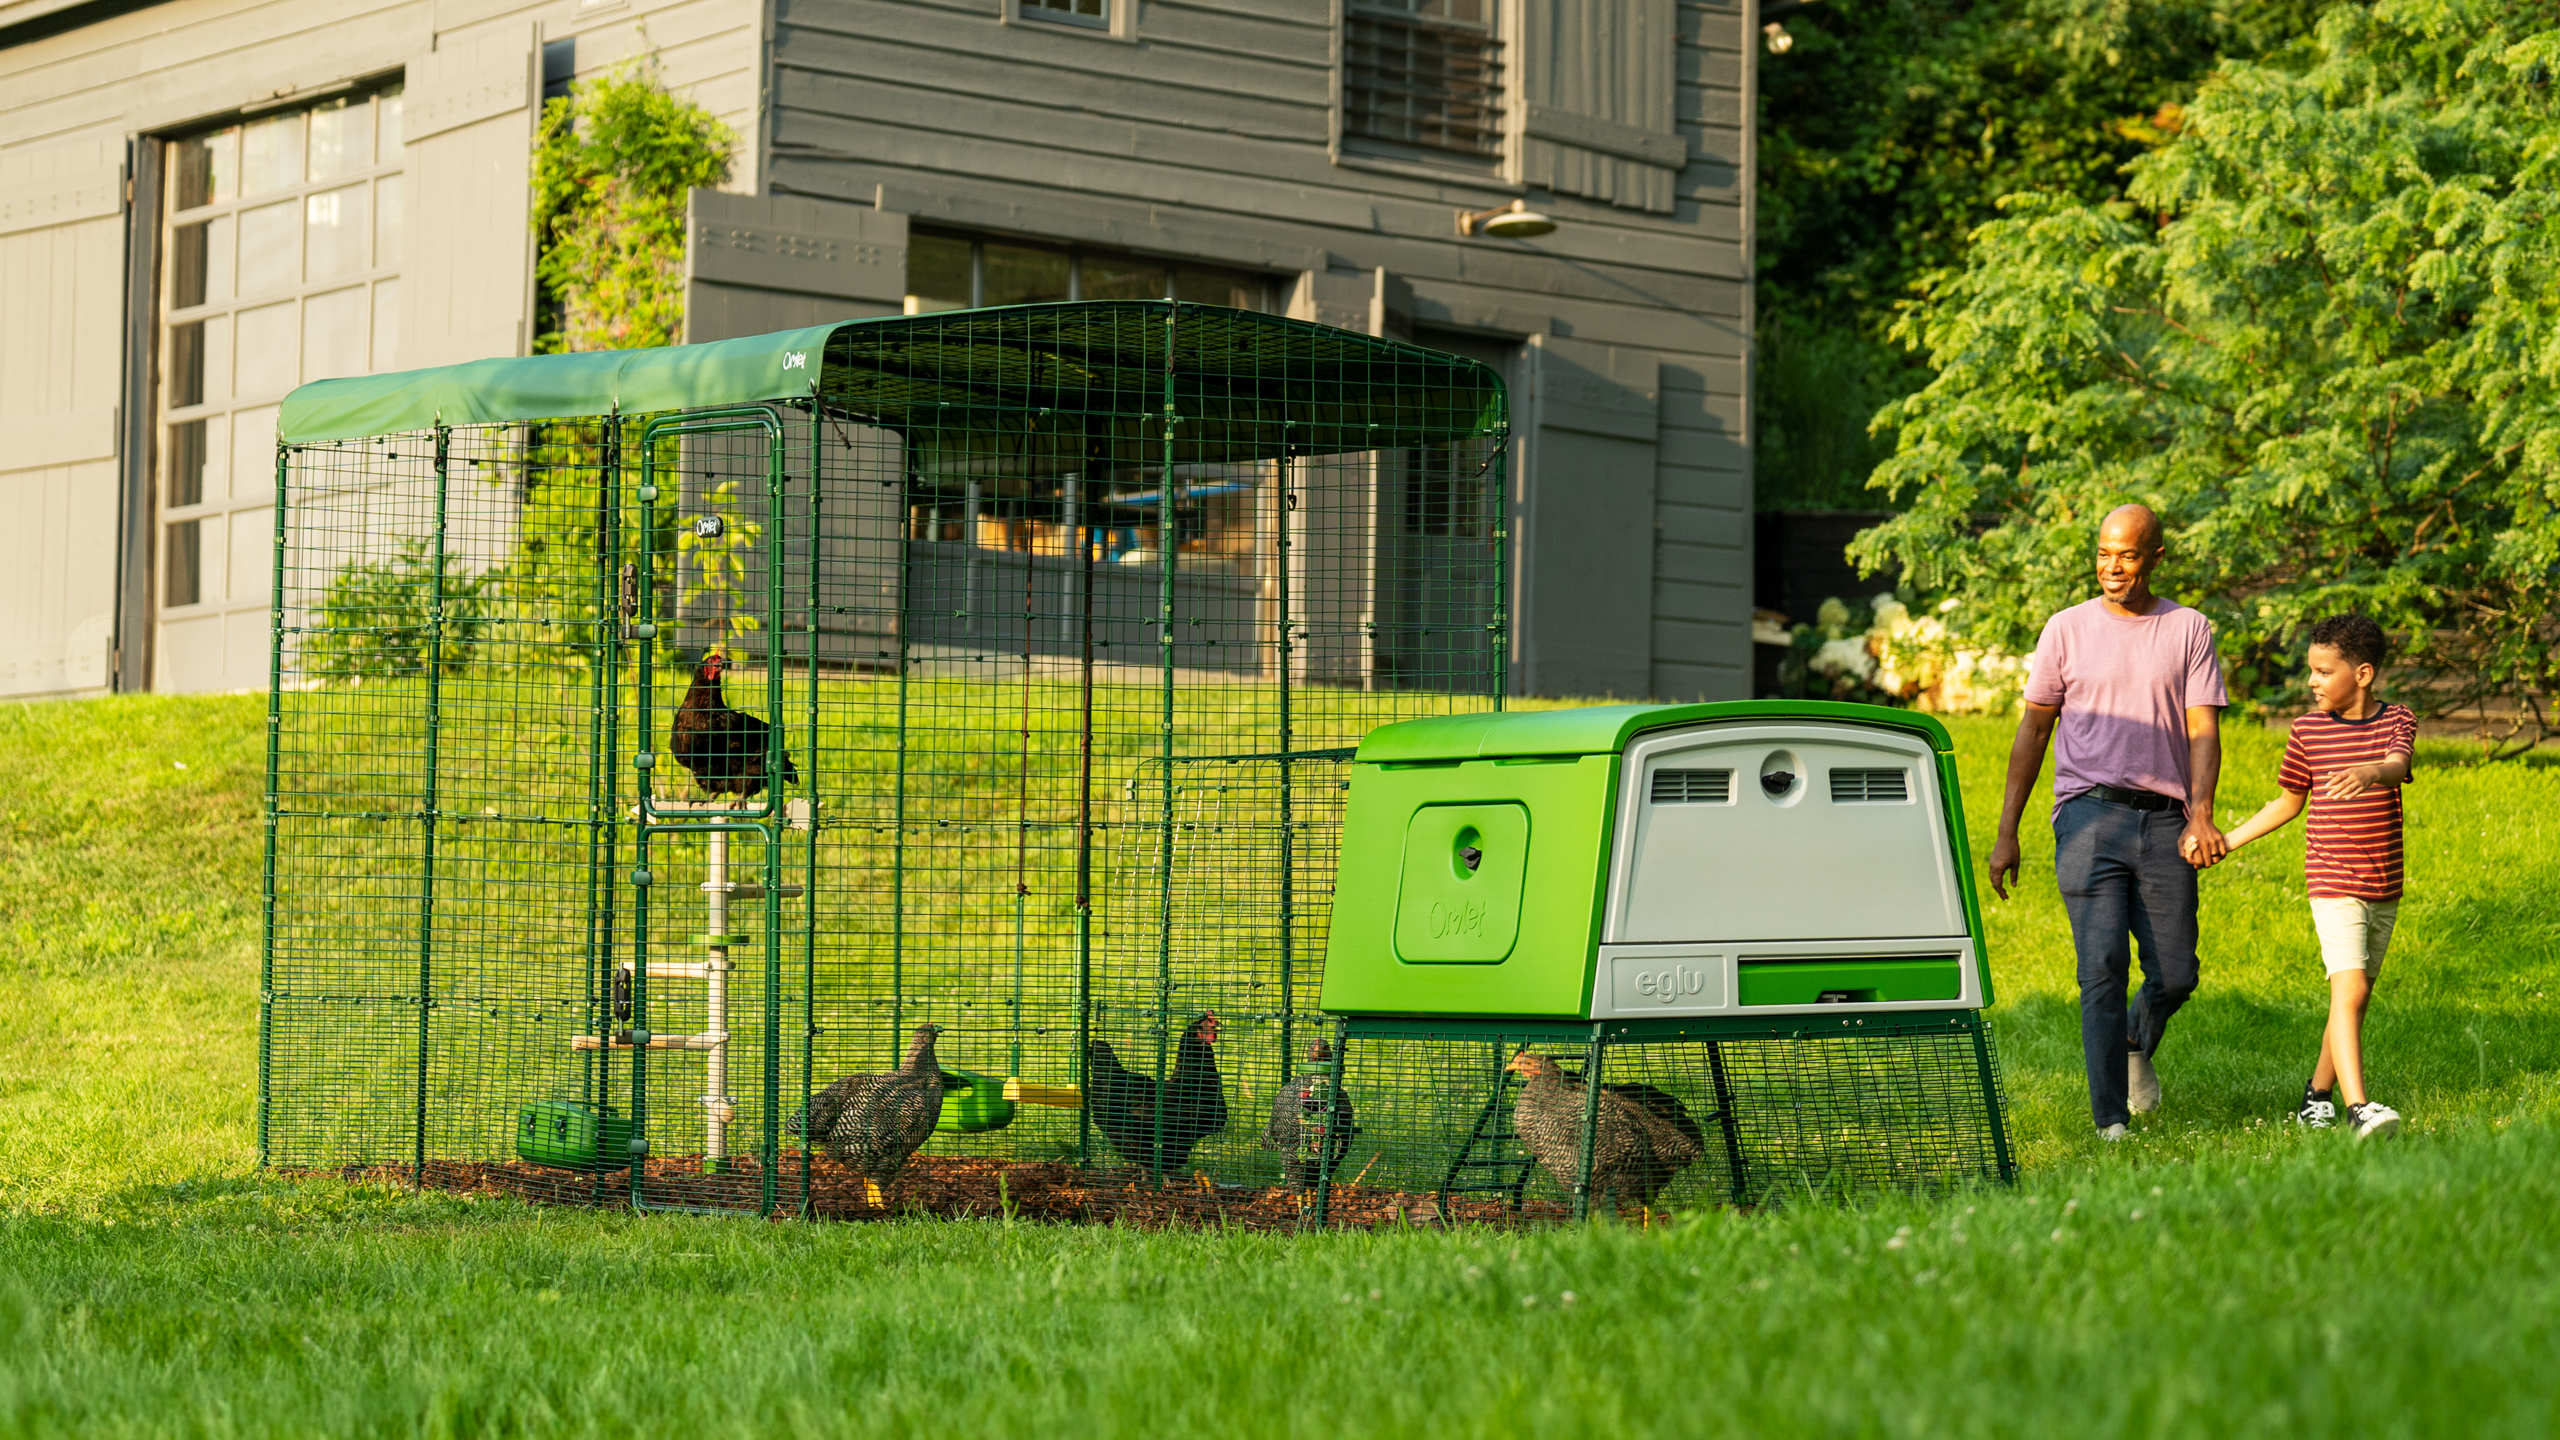 Large Eglu Cube chicken coop and Walk In Run set up on lawn during a sunny day, with a father and son walking by.